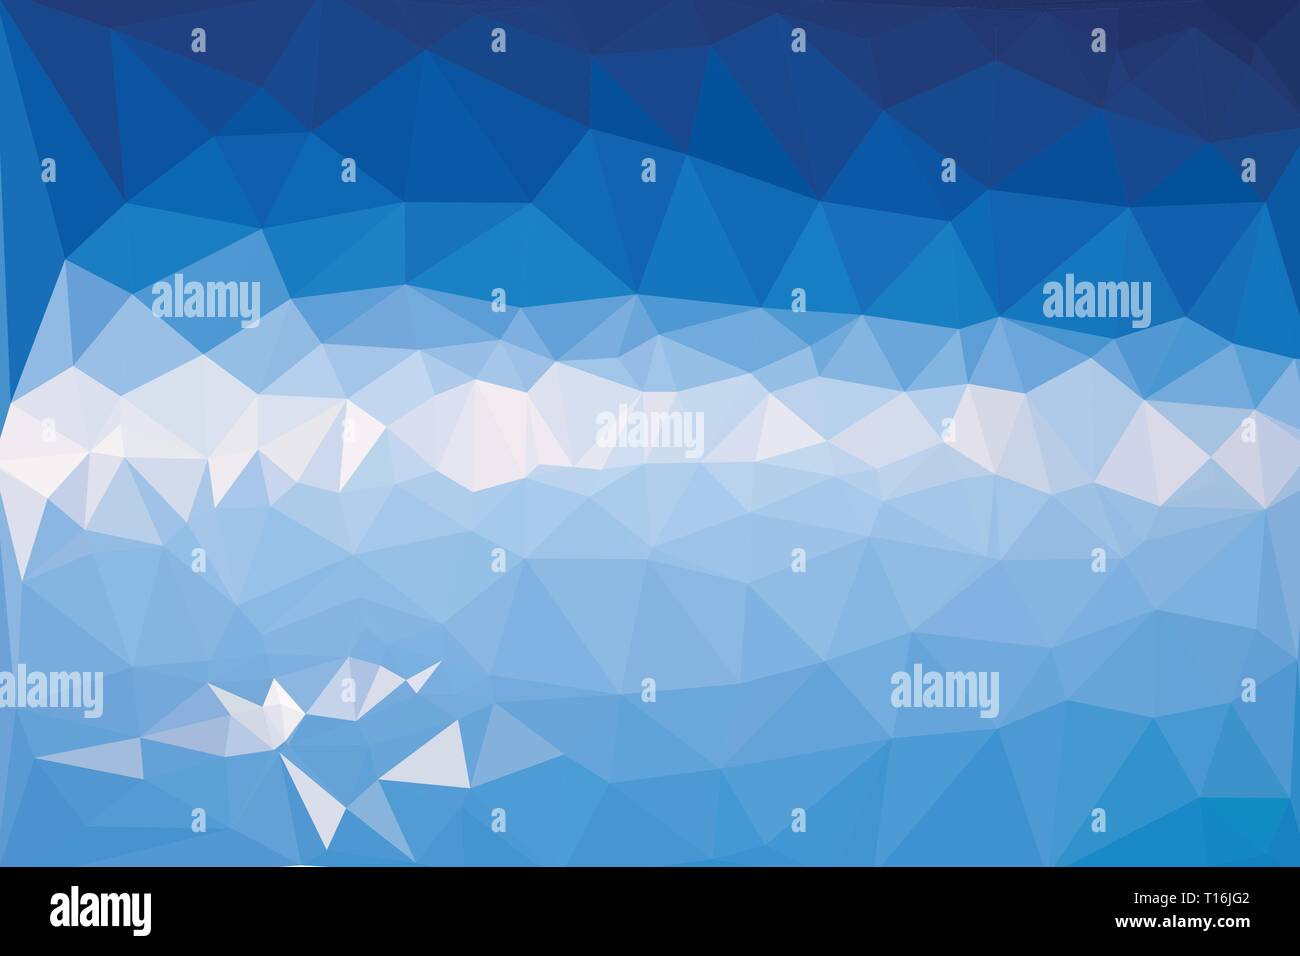 Elegant blue low poly abstract polygon vector background Stock Vector